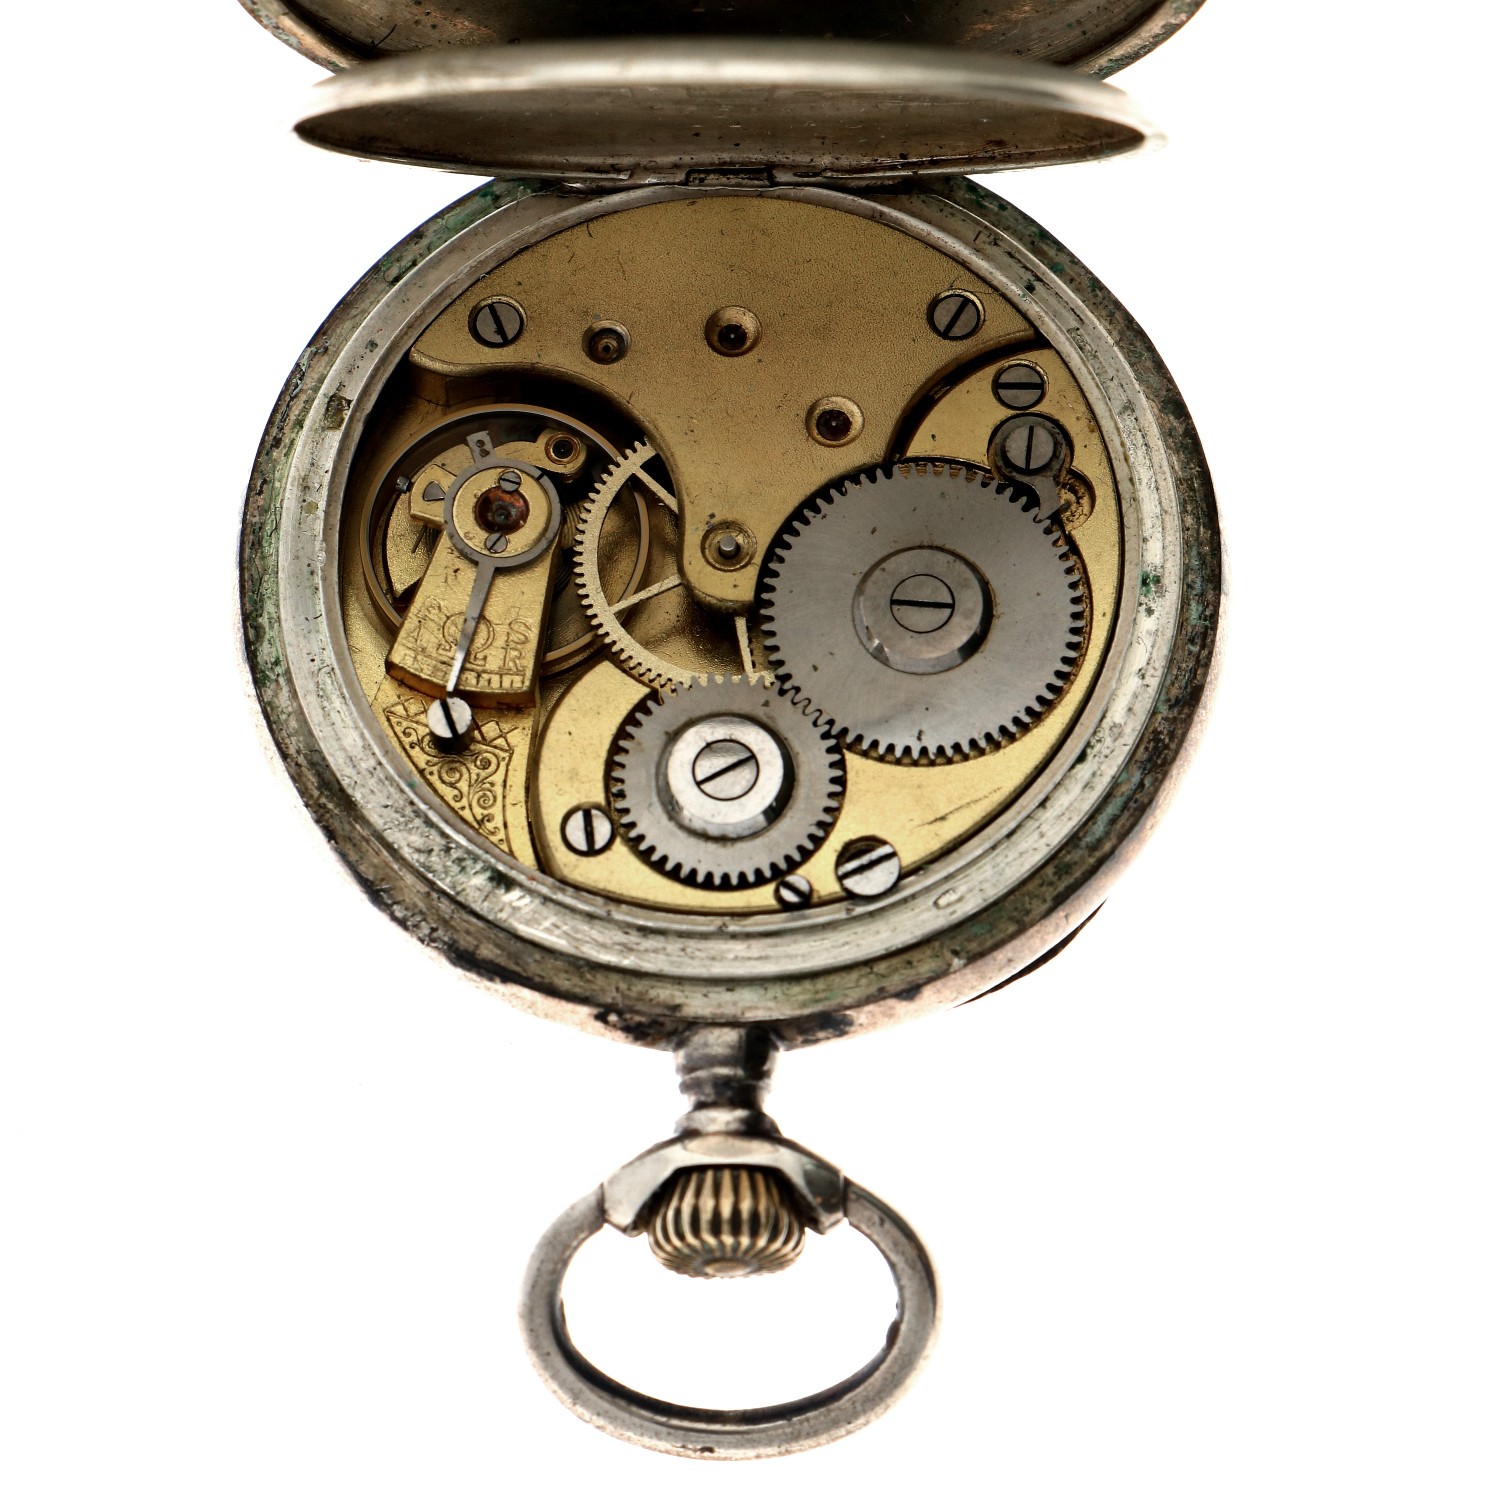 No Reserve - Omega Lever-Escapement silver 800/1000 - Men's pocketwatch - approx. 1958. - Image 3 of 5